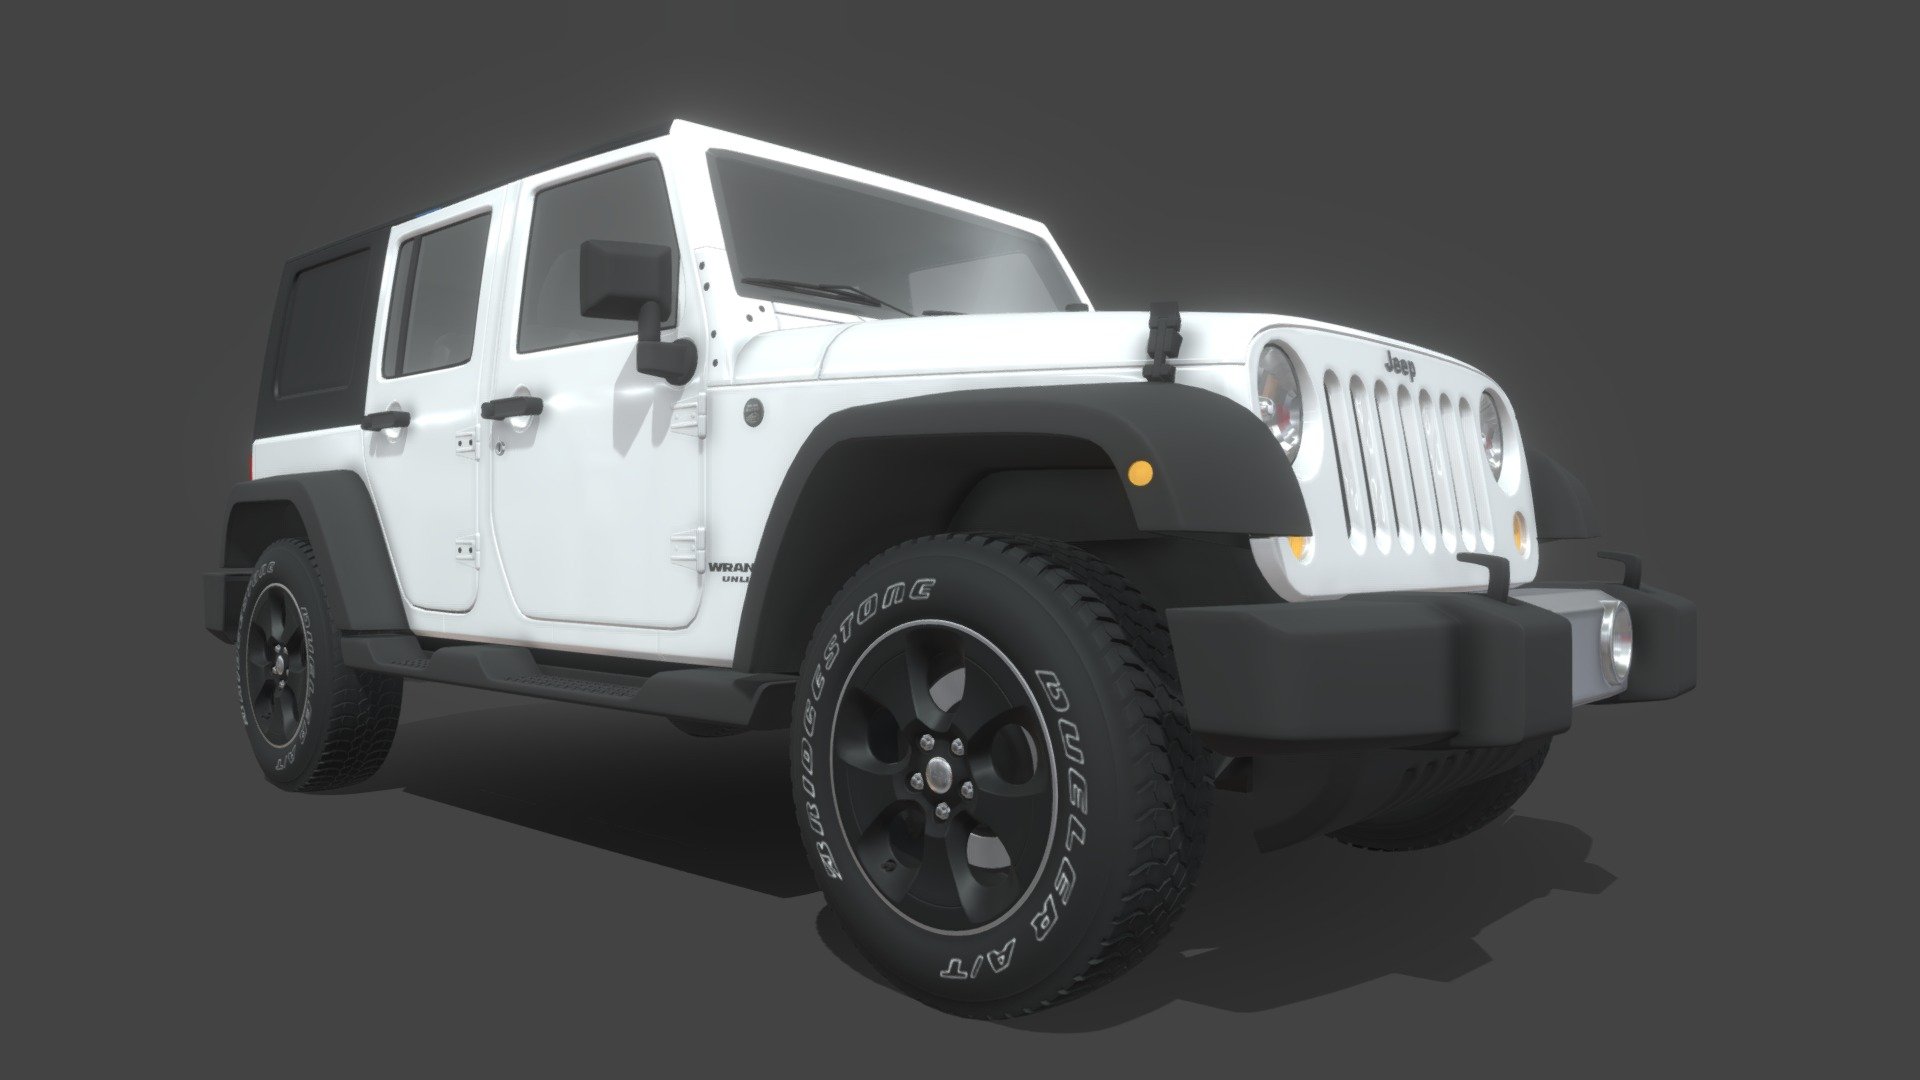 The 4 Door Jeep is one of the many Lime Media assets. This Jeep is perfect for pulling a small trailer for activation.
The model was purchased from Turbosquid and animated by Scott Neece - Jeep Wrangler 4 Door - 3D model by Lime-Media 3d model